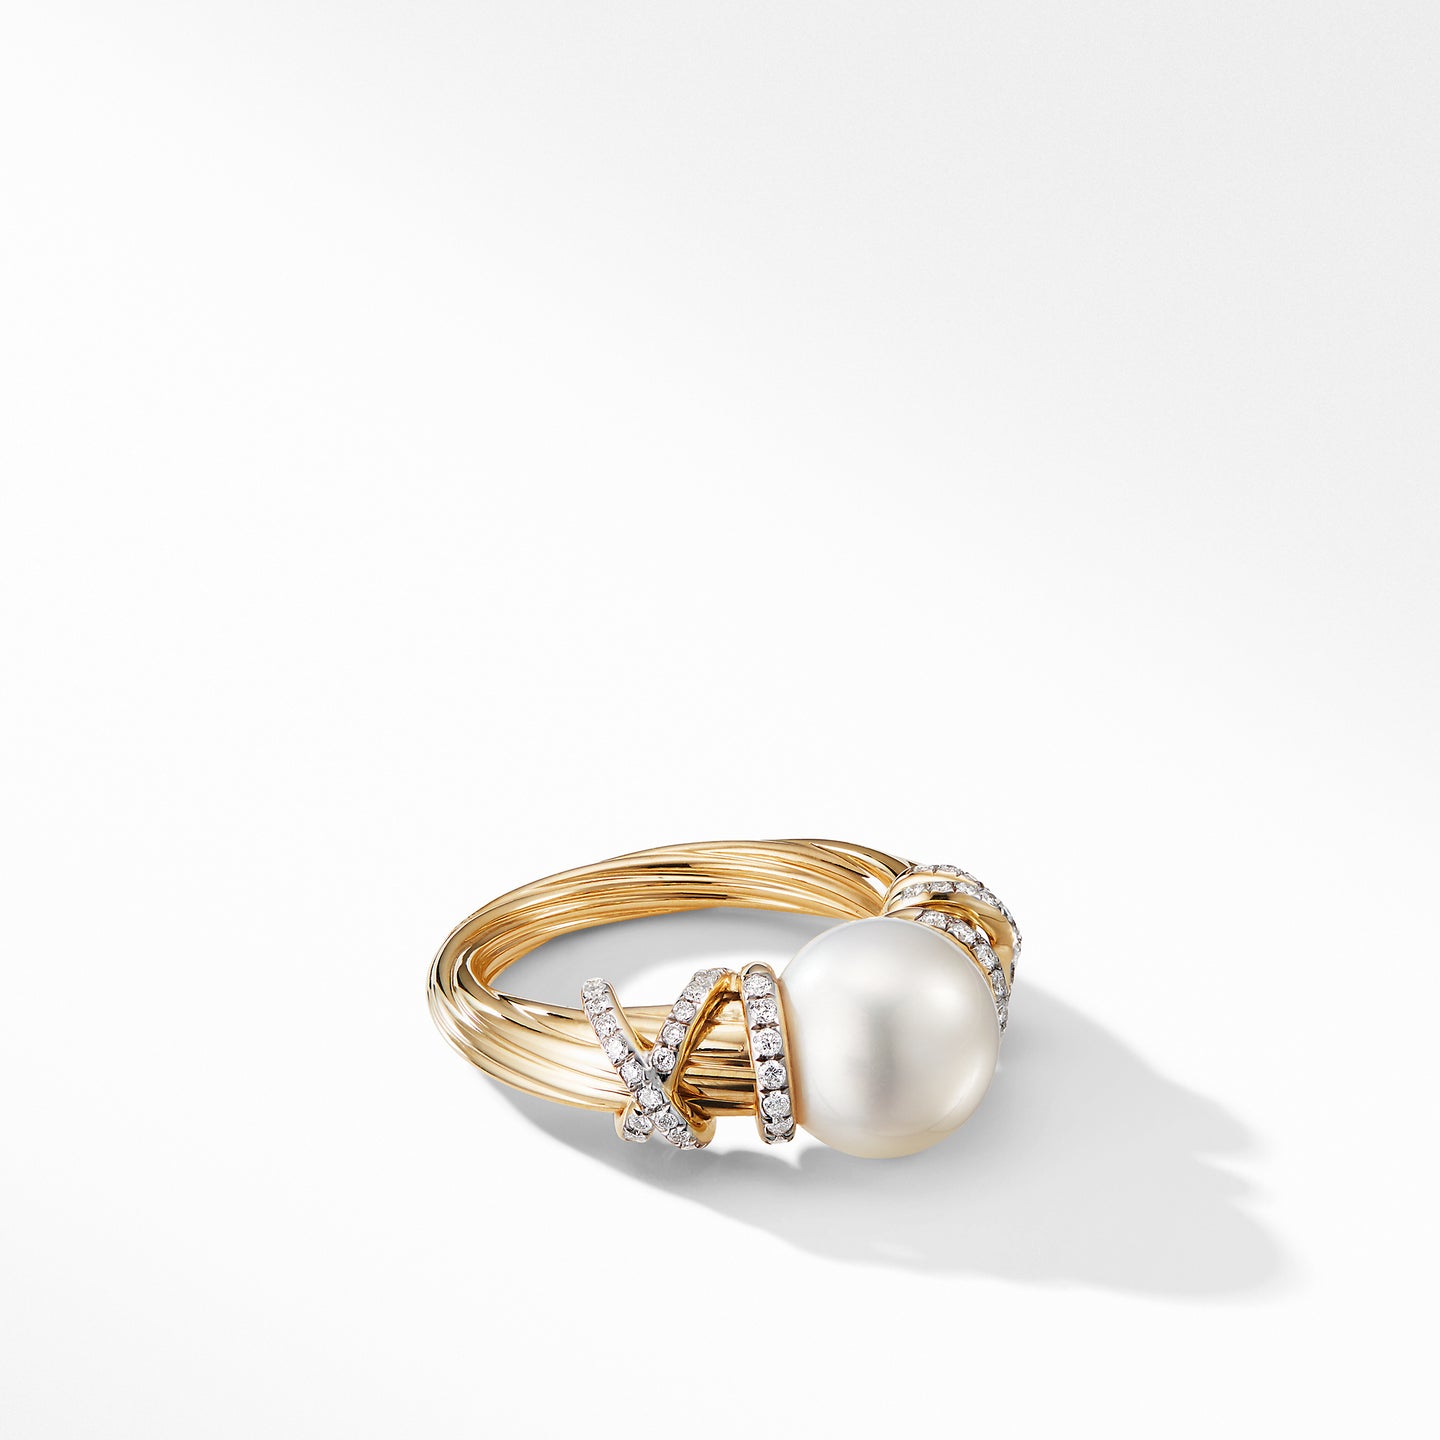 Helena Pearl Ring in 18K Yellow Gold with Diamonds, Size 6